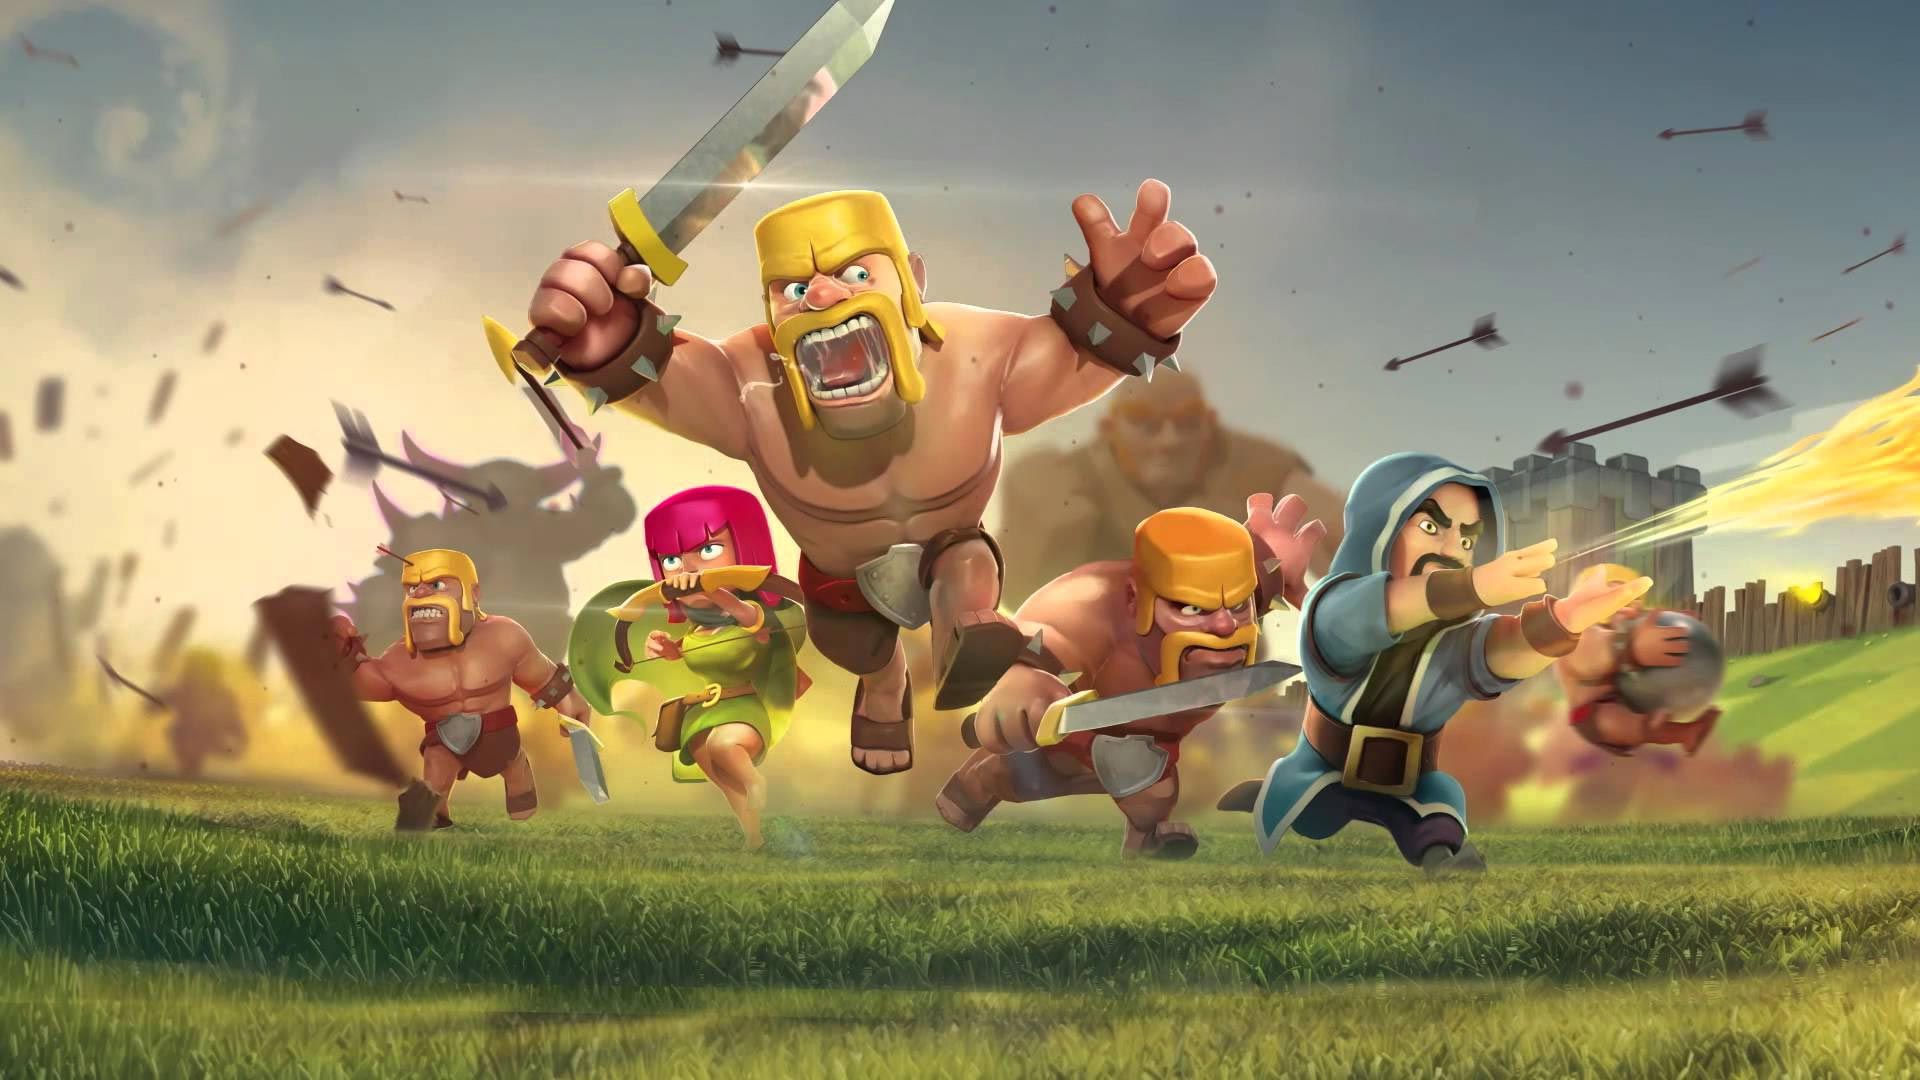 Clash Of Clans Wallpaper. Top Clash Games Image